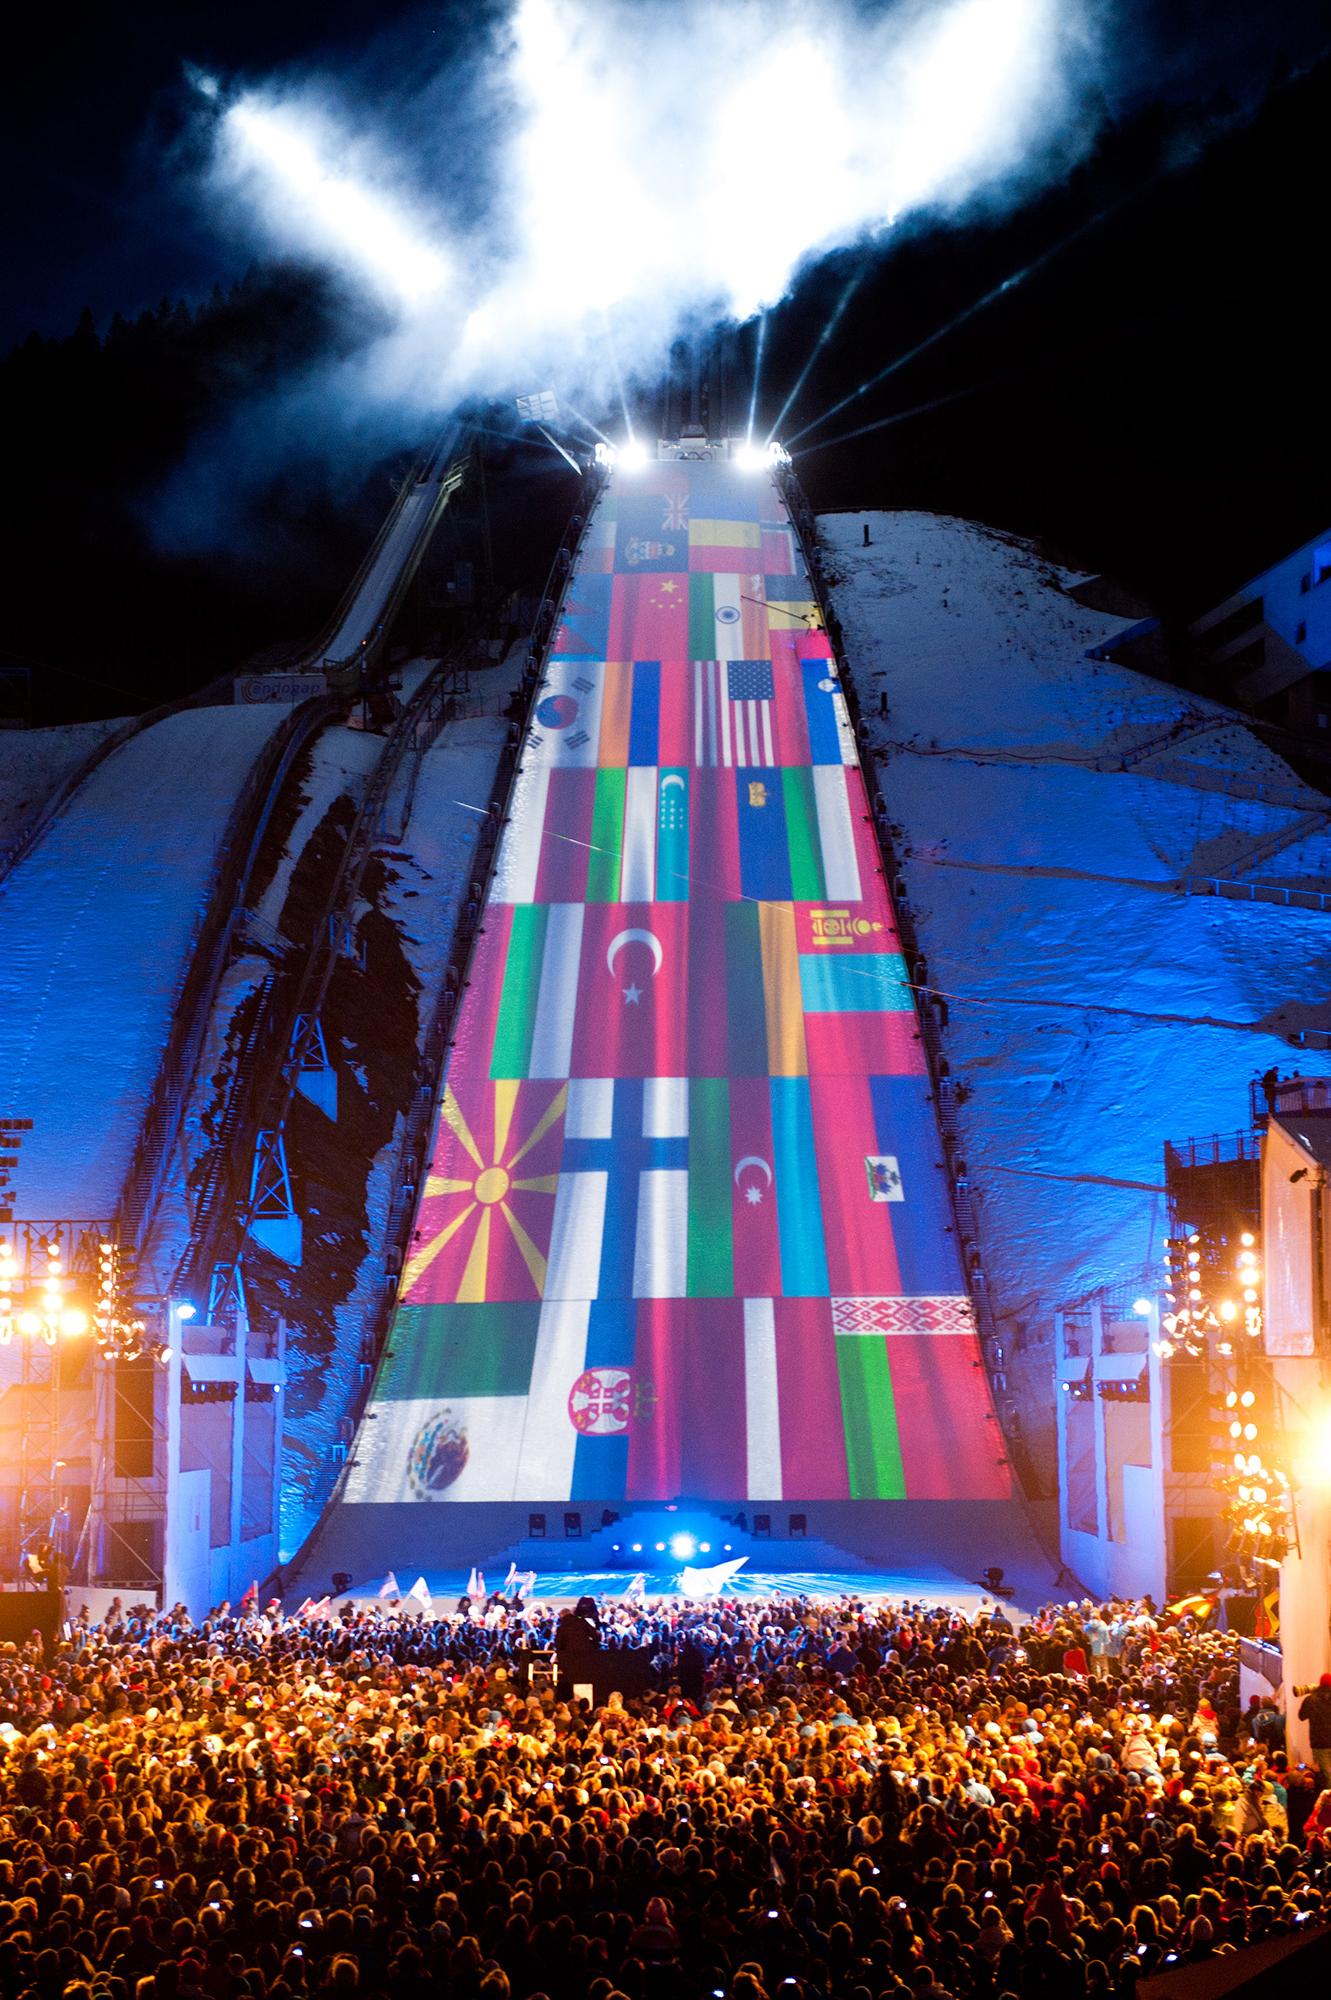 Many flags are projection mapped onto the ski slope as a sea of people looks on.